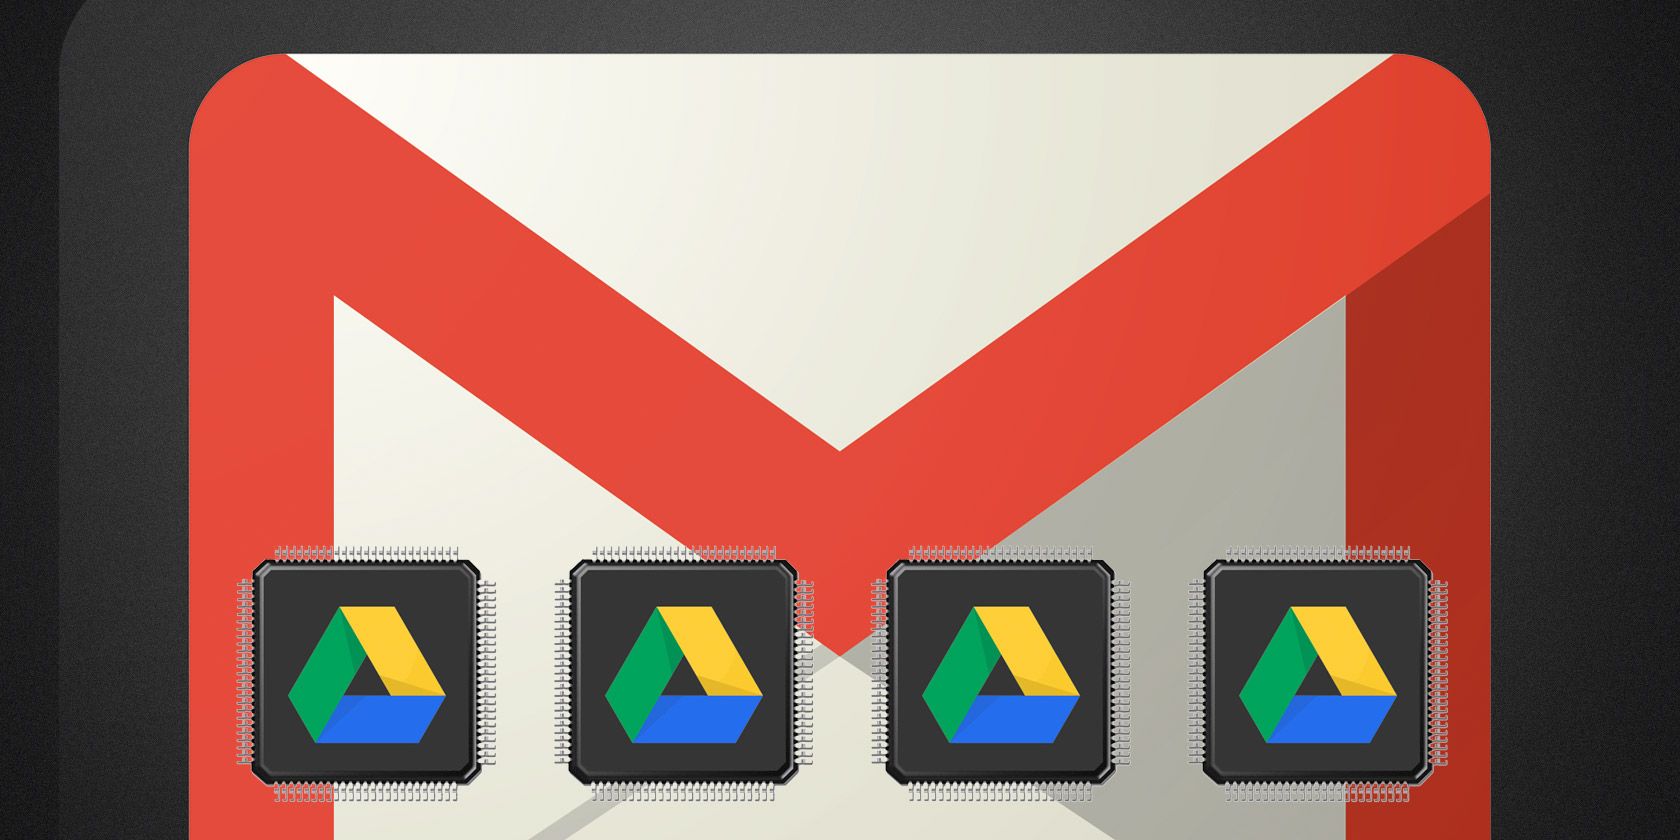 can you download google drive for mac